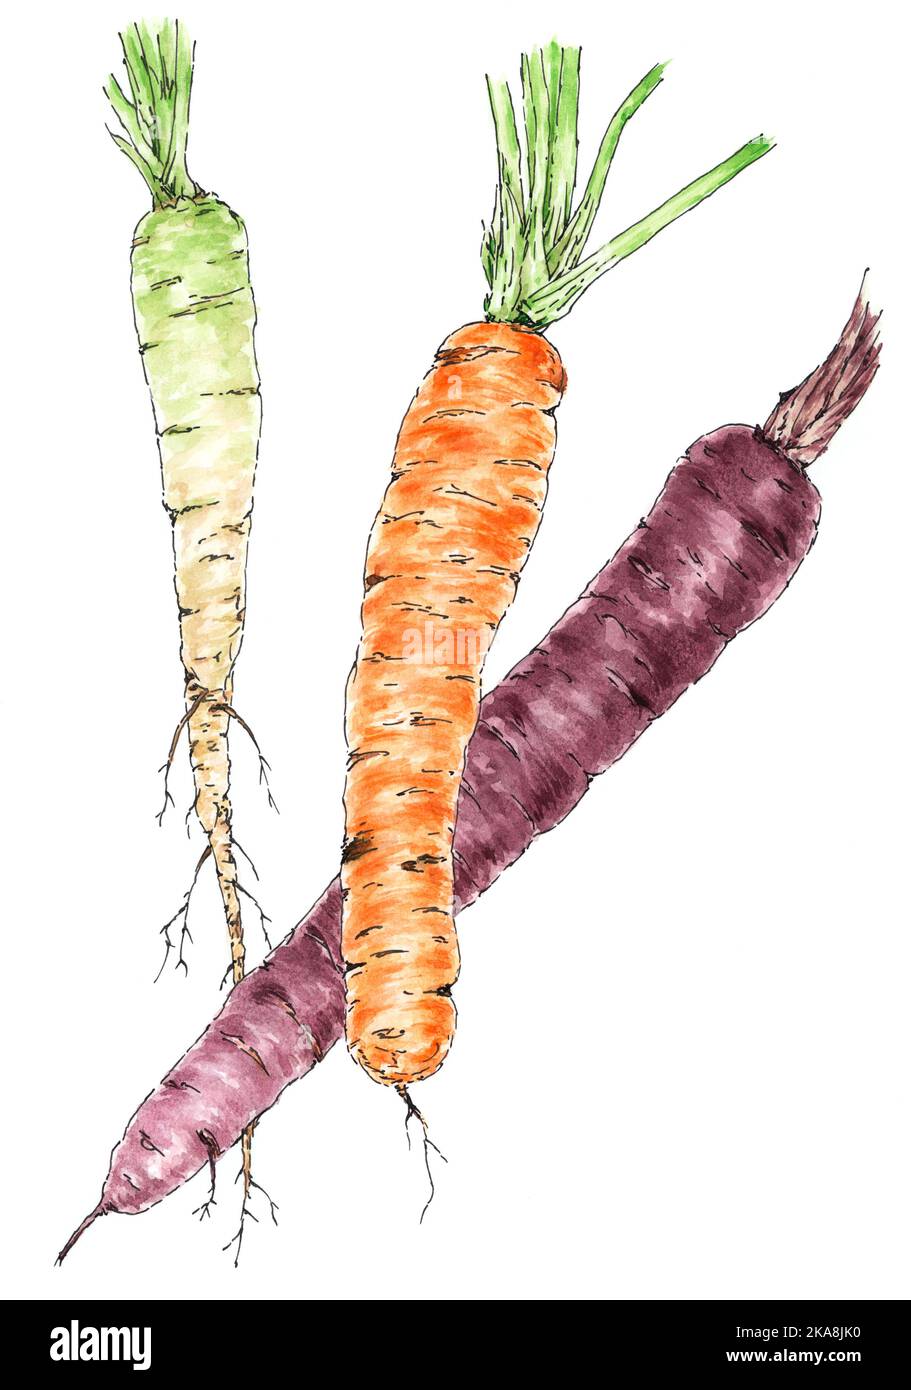 Carrot (Daucus carota subsp. sativus) roots botanical drawing. Ink and watercolor on paper. Stock Photo